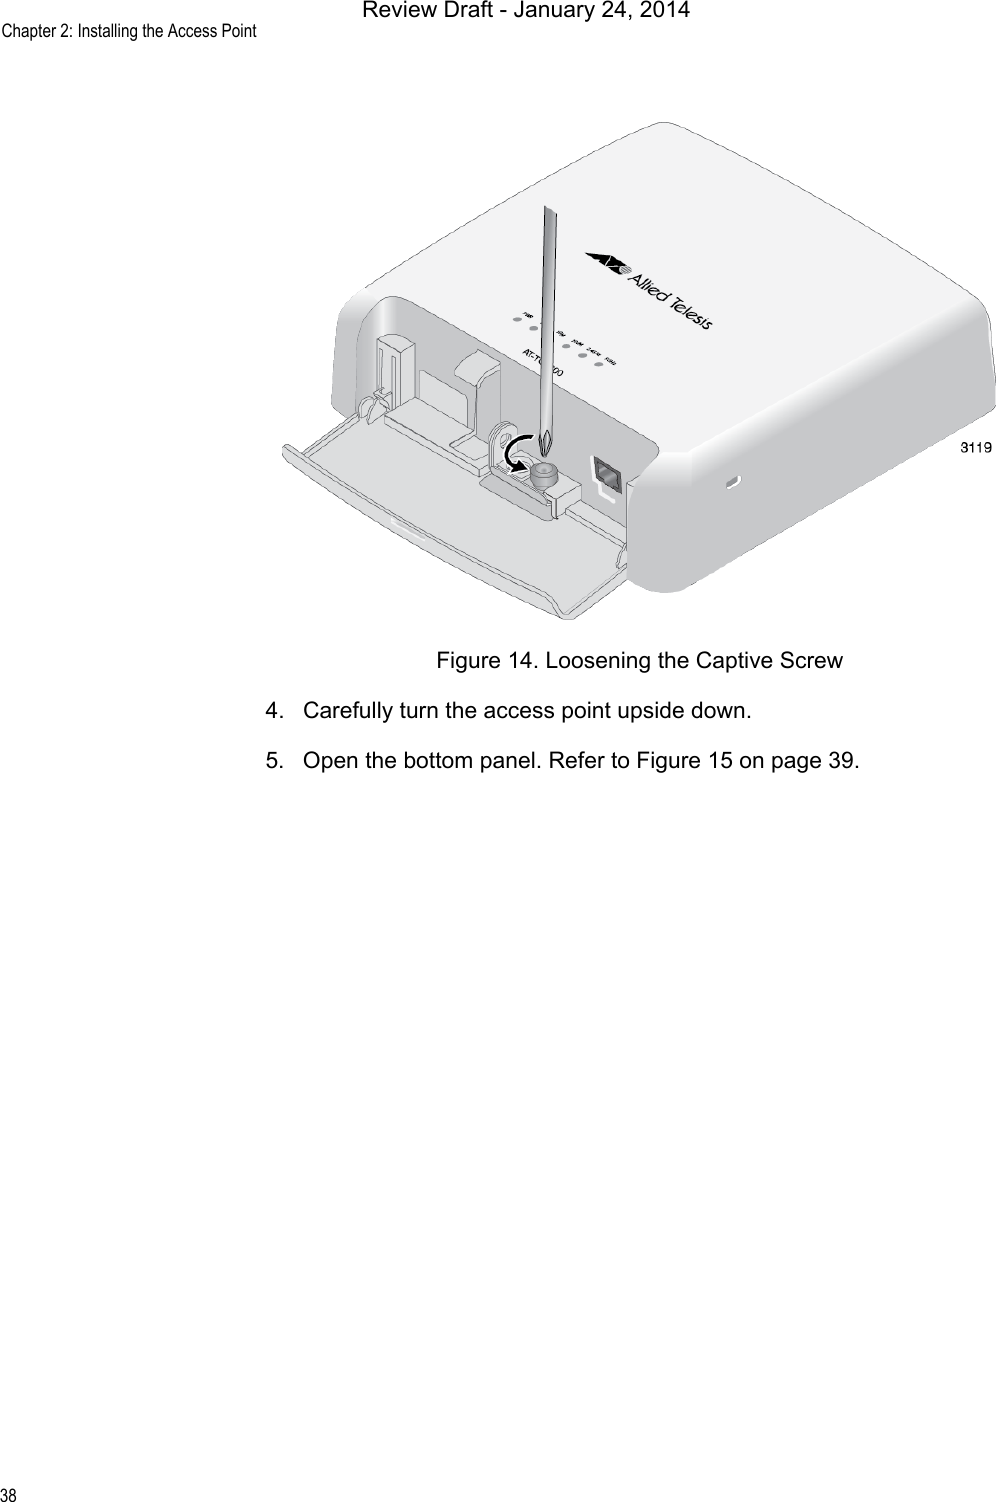 Chapter 2: Installing the Access Point38Figure 14. Loosening the Captive Screw4. Carefully turn the access point upside down.5. Open the bottom panel. Refer to Figure 15 on page 39.Review Draft - January 24, 2014